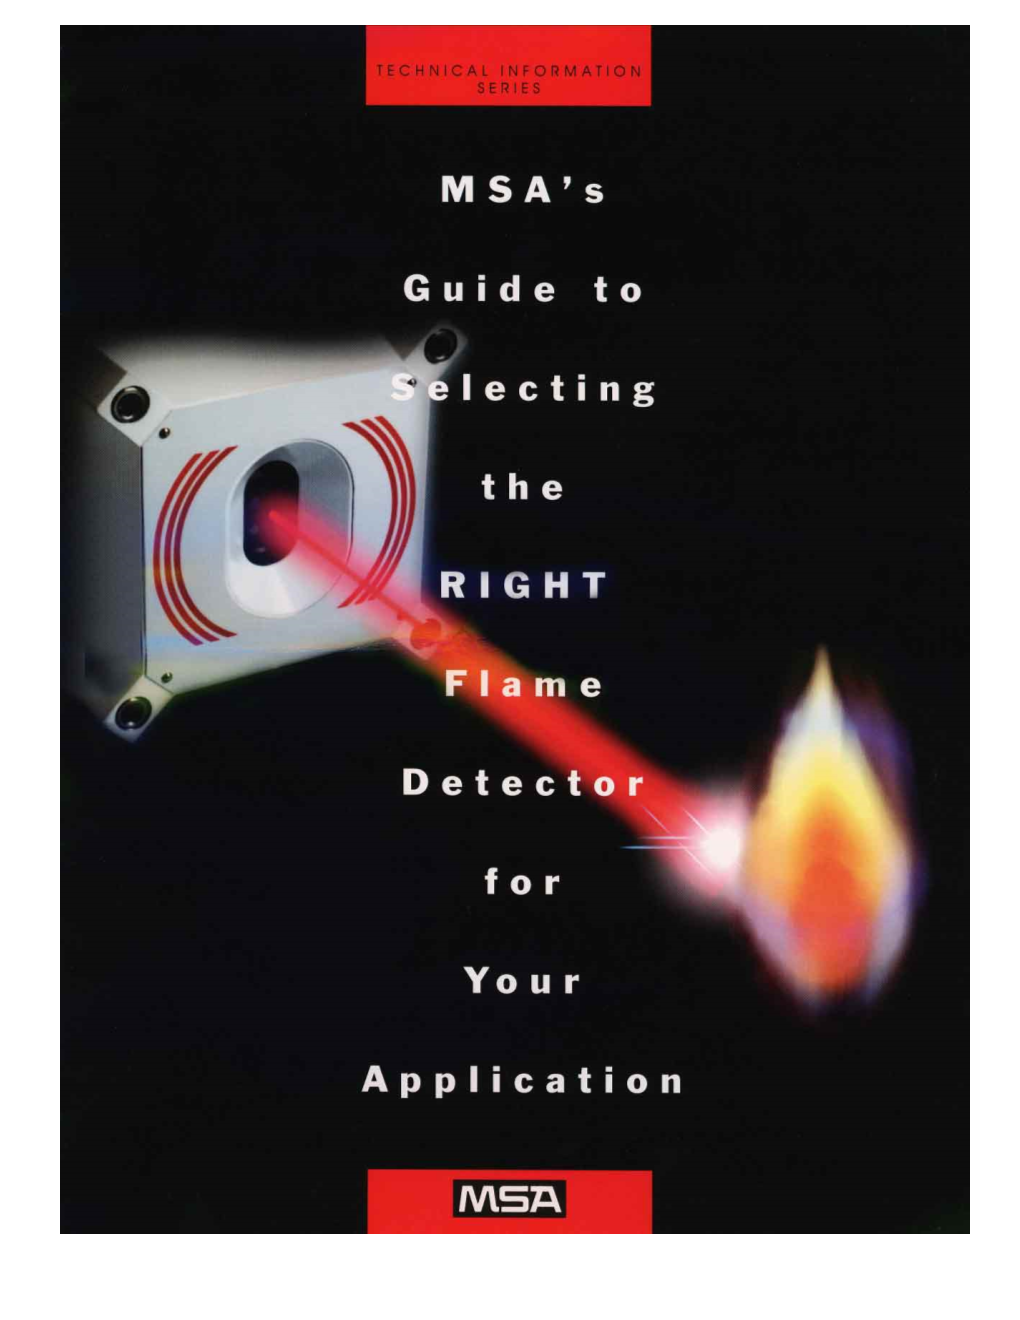 Flame Detector for Your Application